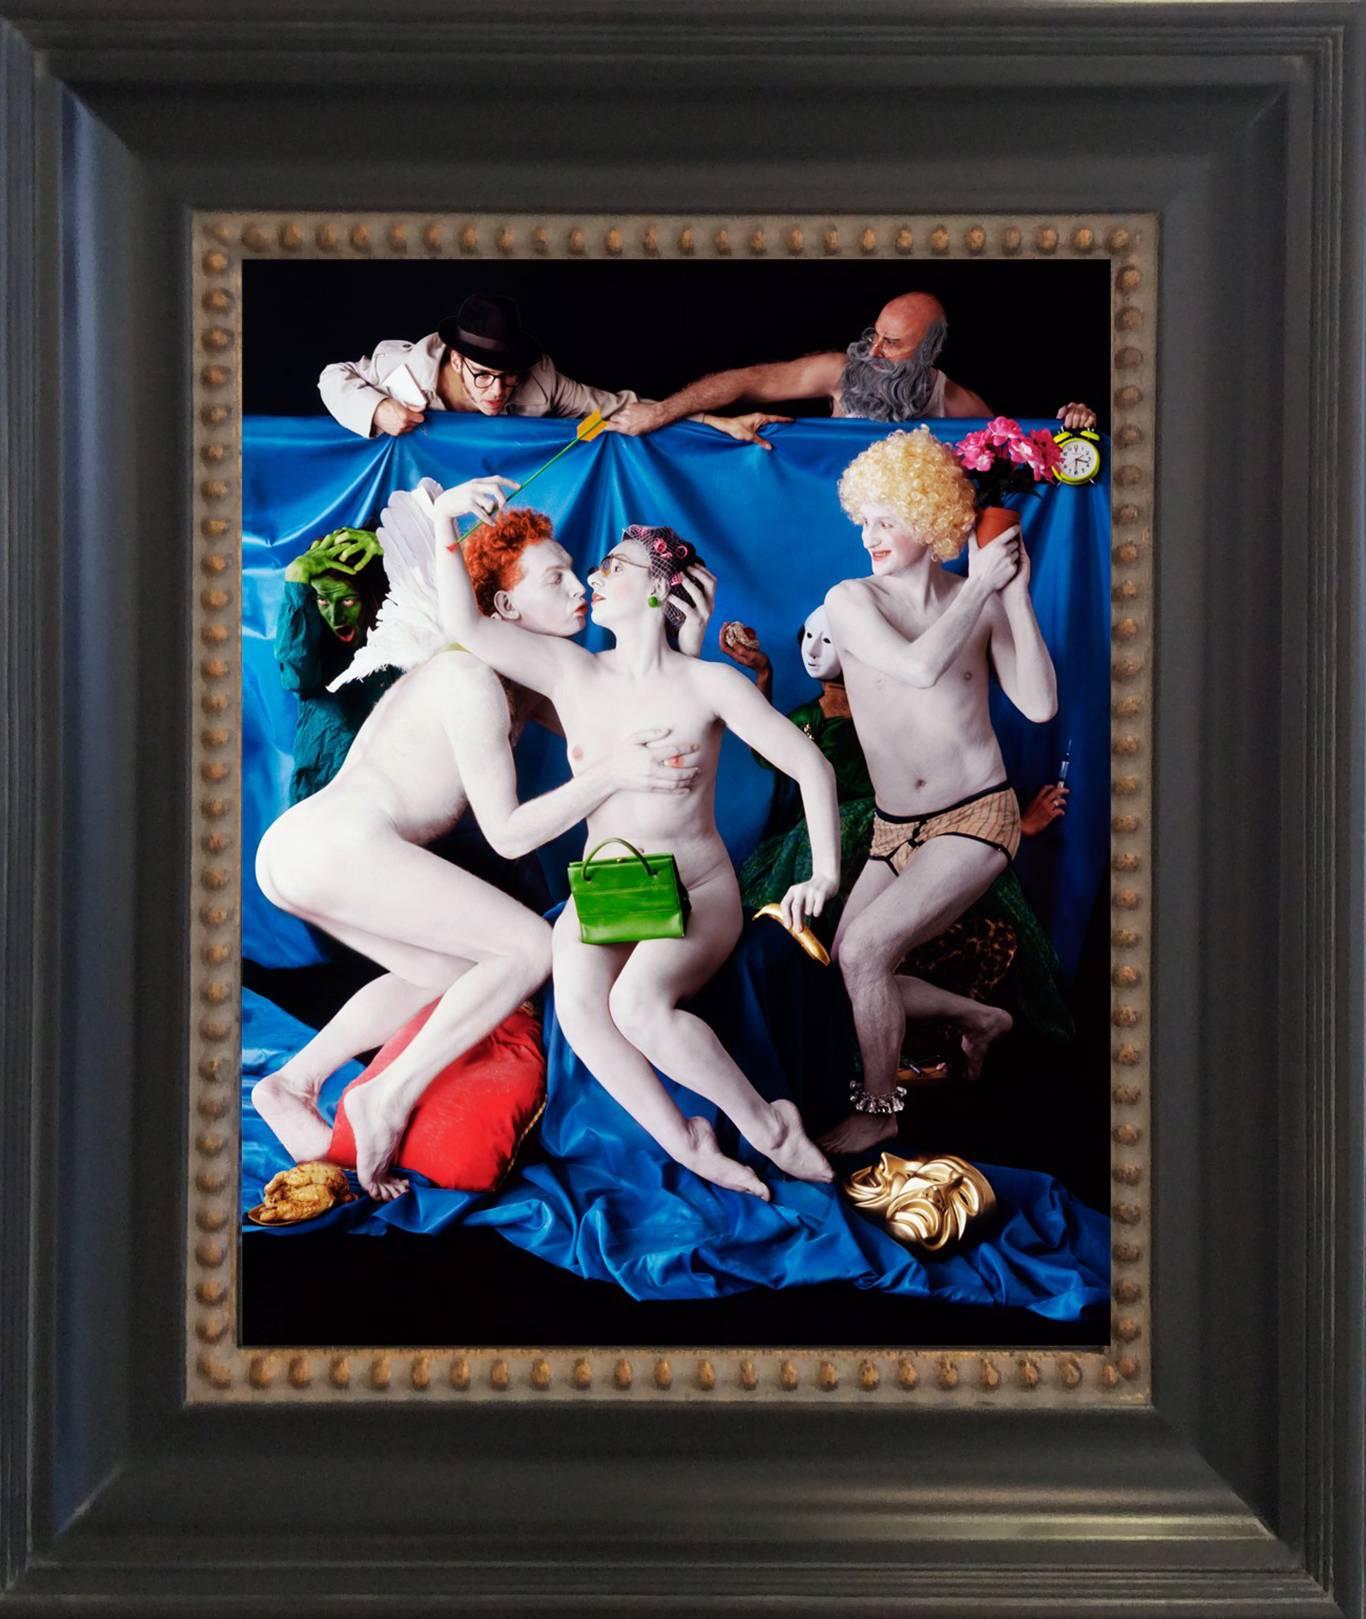 Nick Simpson Black and White Photograph - The Perambulator: Whimsical Renaissance Inspired Color Archival Print